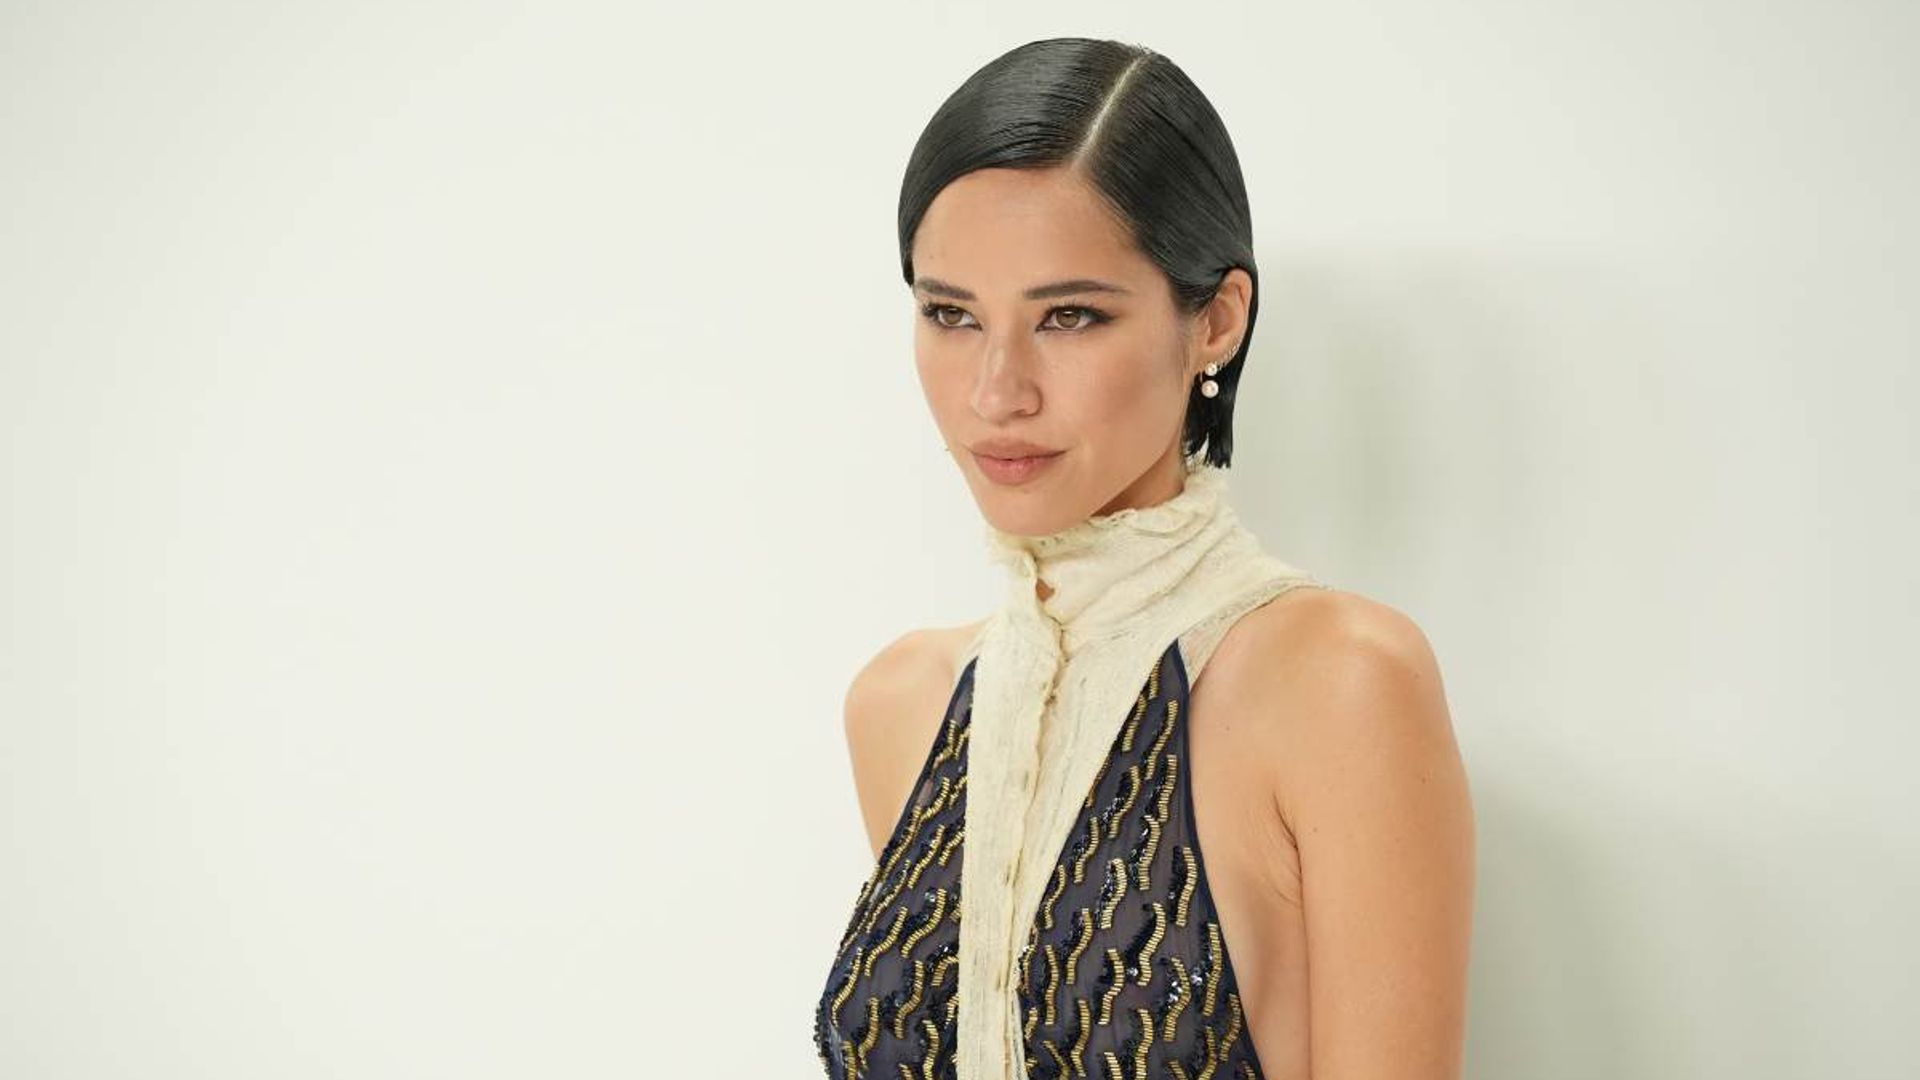 Yellowstone' Star Kelsey Asbille Stuns in Strapless Dress on the Red Carpet